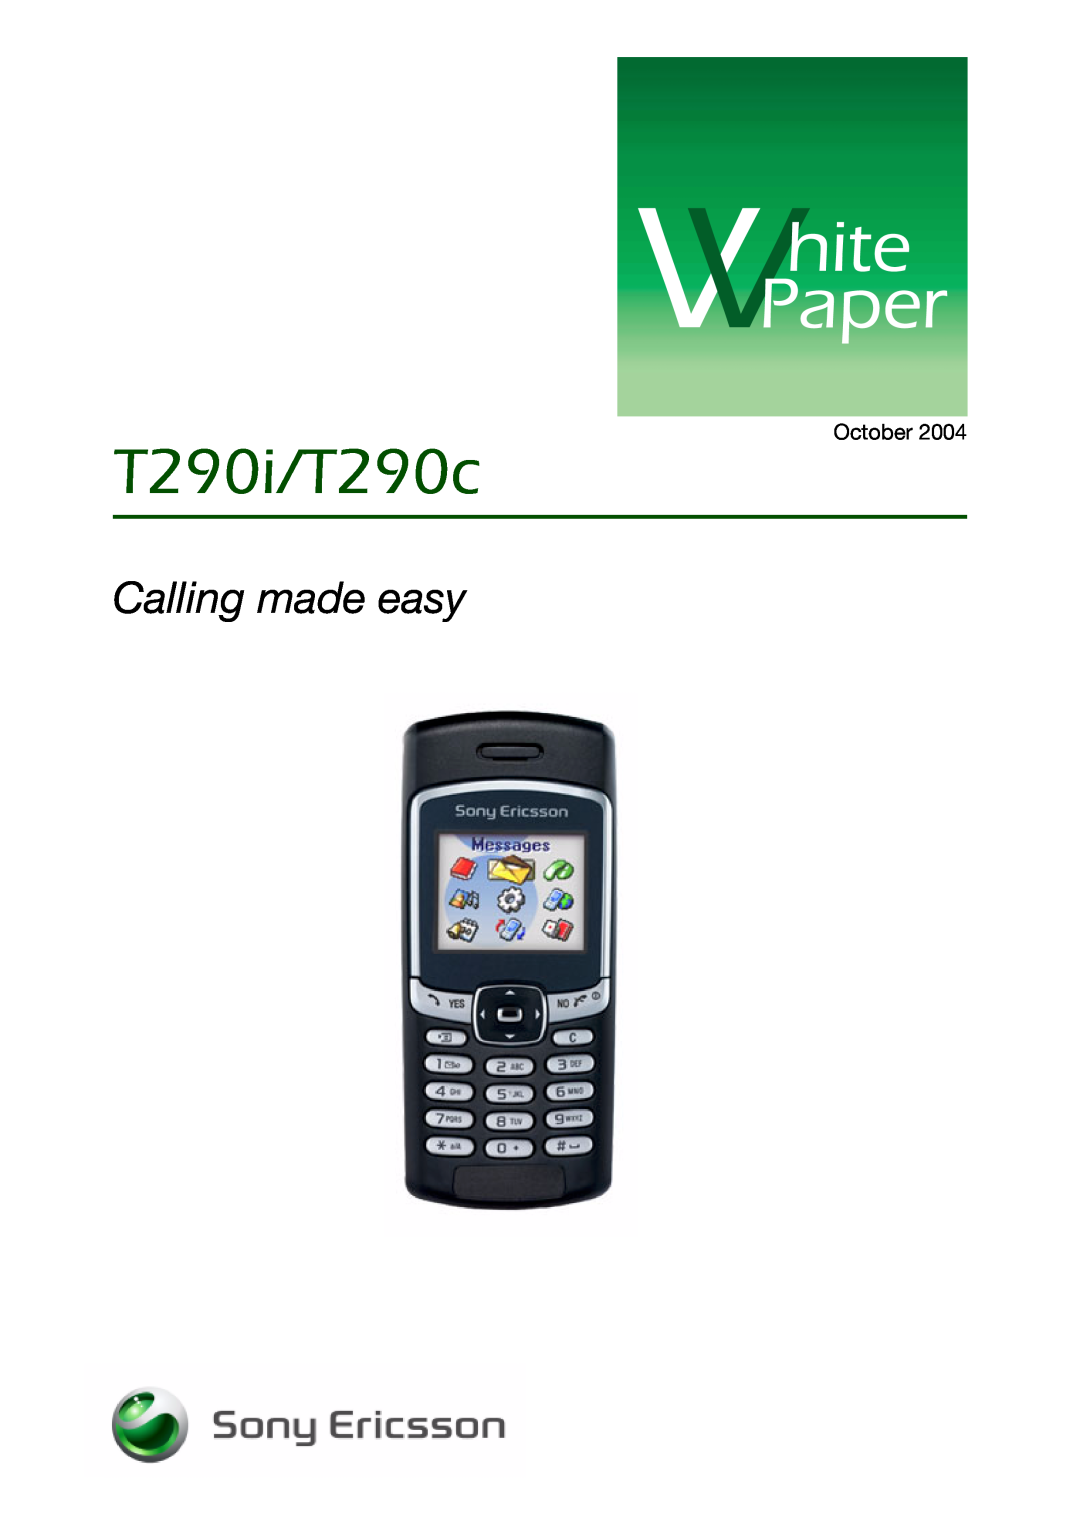 Sony Ericsson manual T290i/T290c, October, Calling made easy 